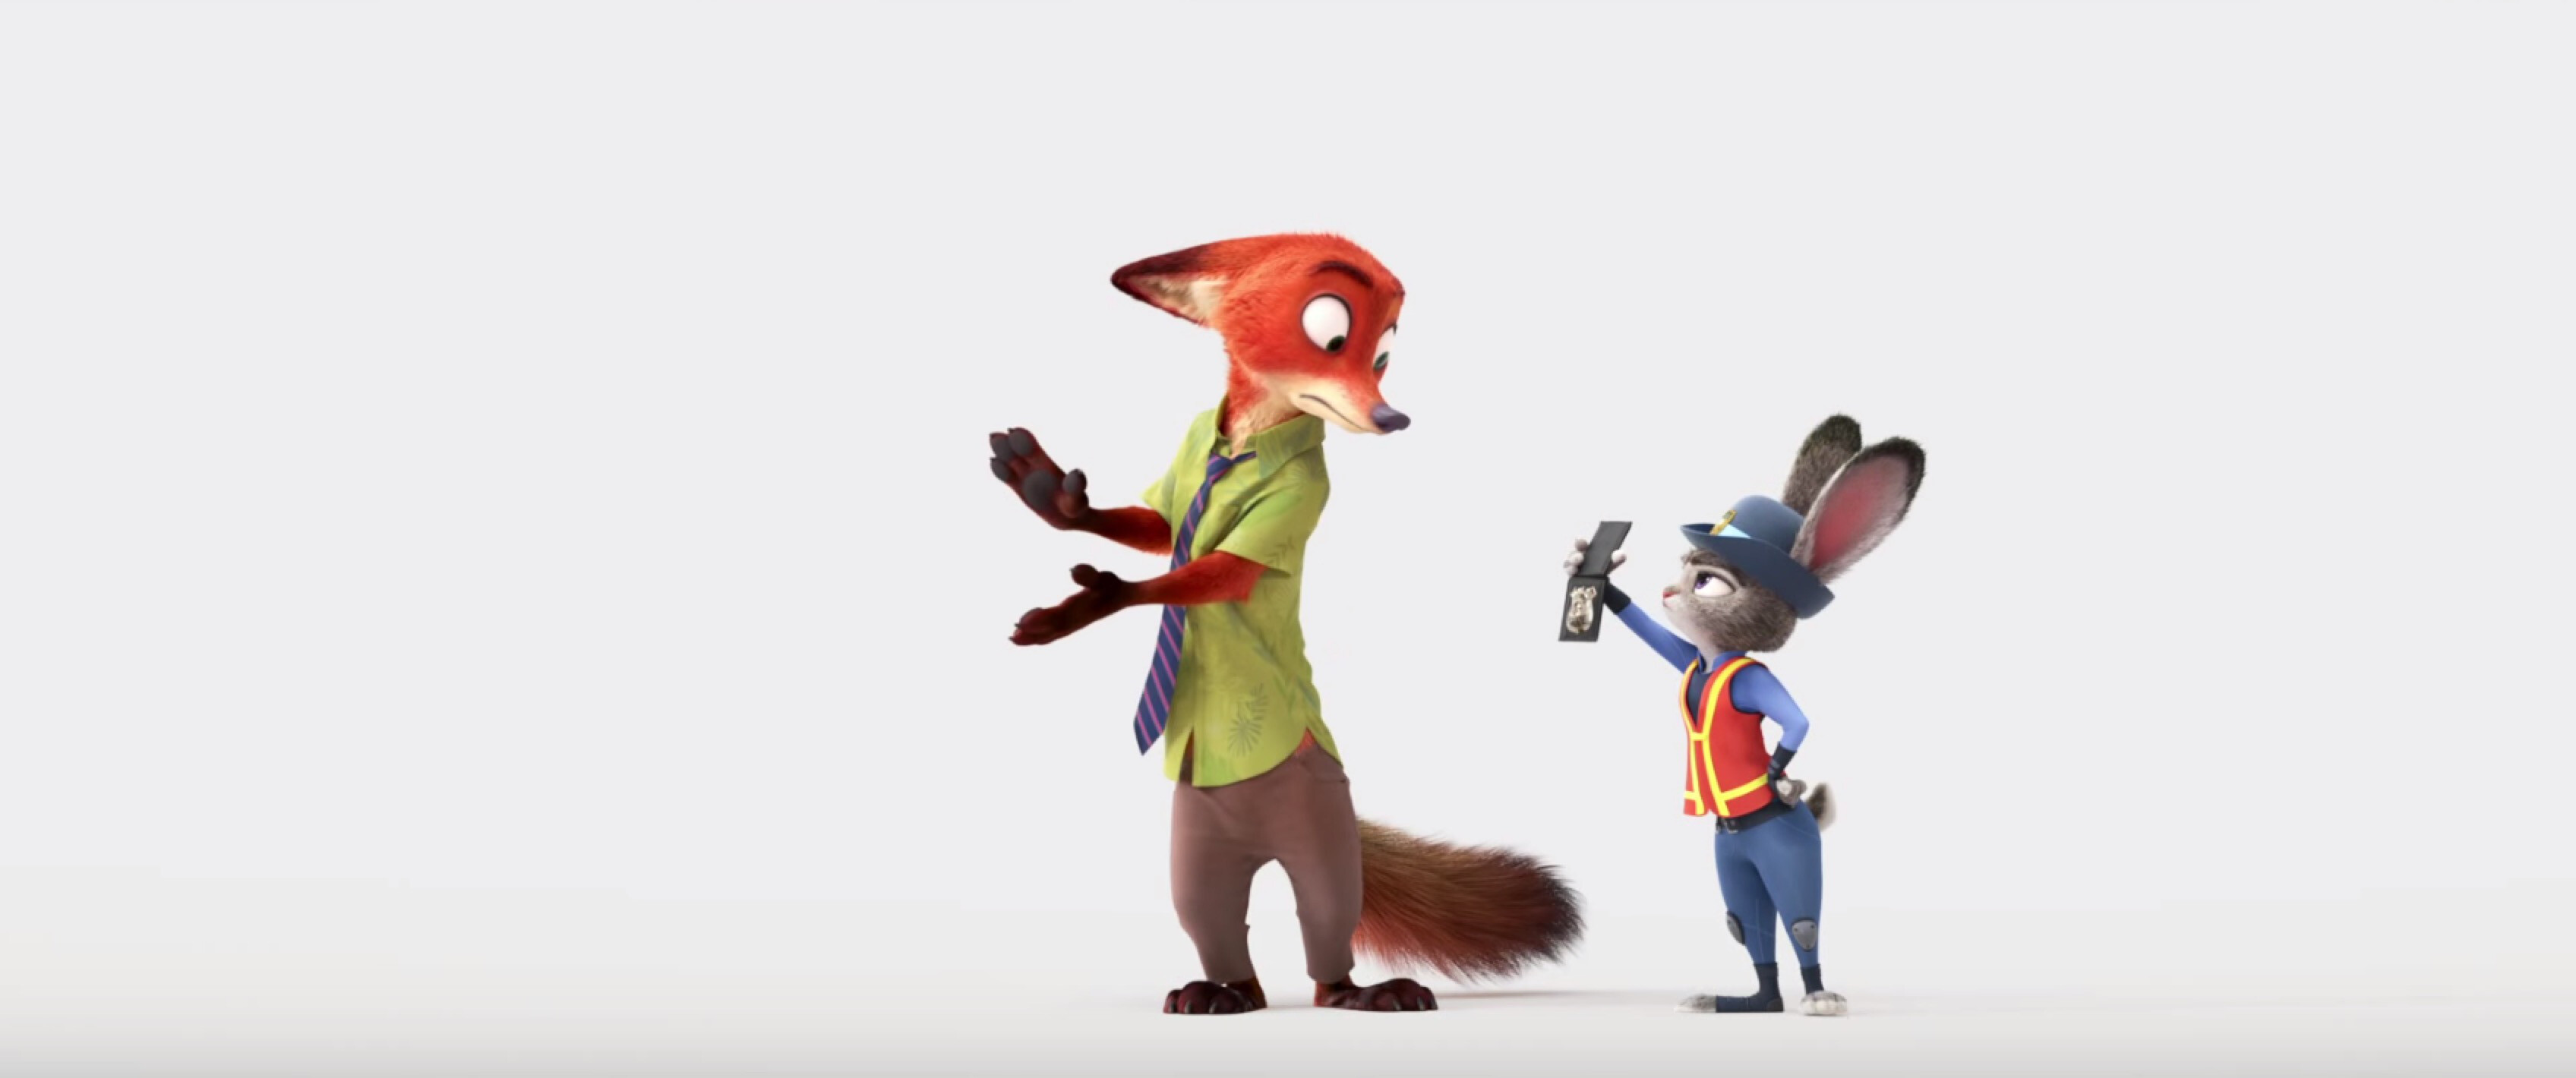 Zootopia: The film opened to record-breaking box offices in several countries, and earned a worldwide gross of over $1 billion, making it the fourth-highest-grossing film of 2016. 3400x1420 Dual Screen Background.